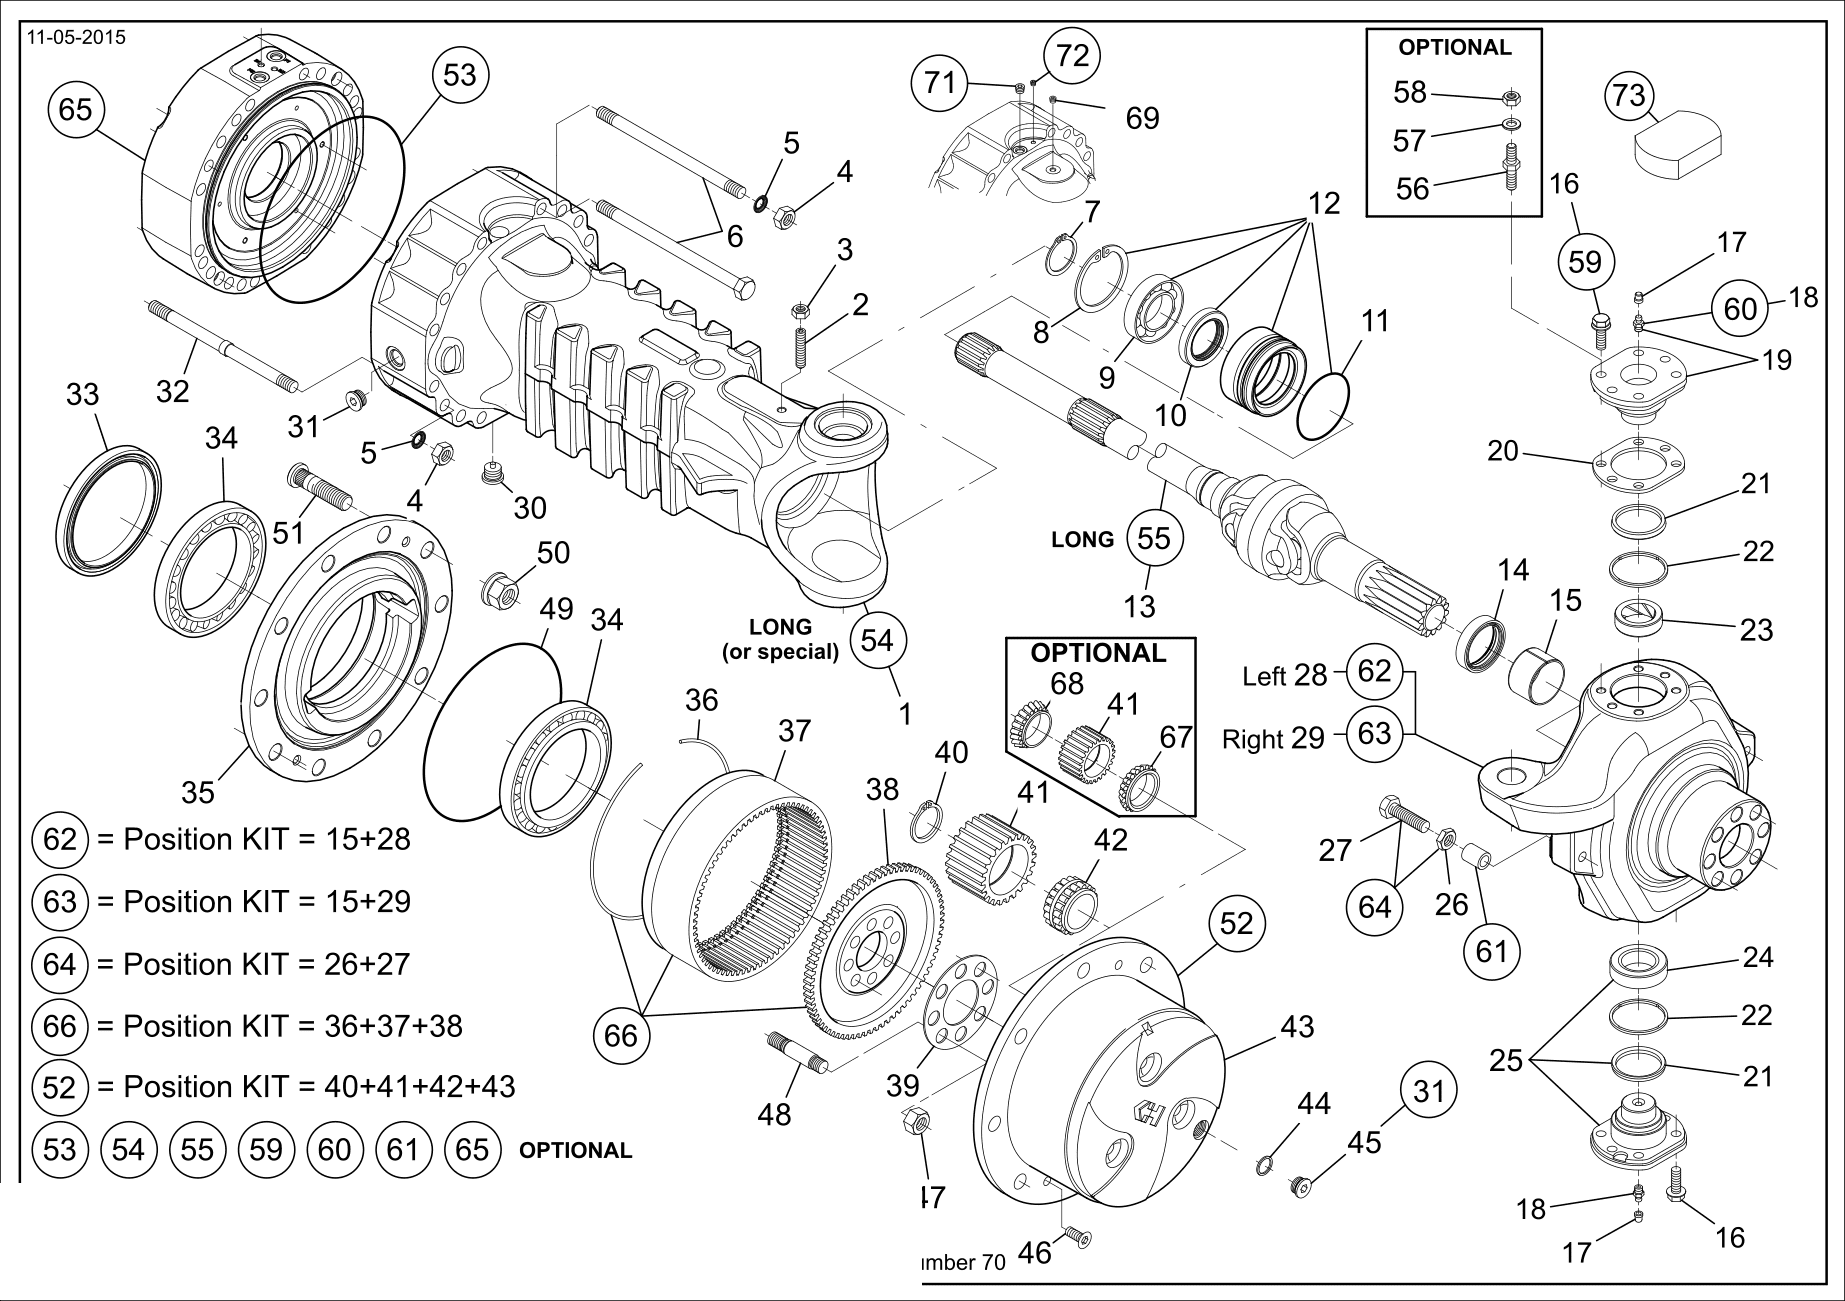 drawing for CNH NEW HOLLAND 87701524 - STEERING CASE (figure 4)